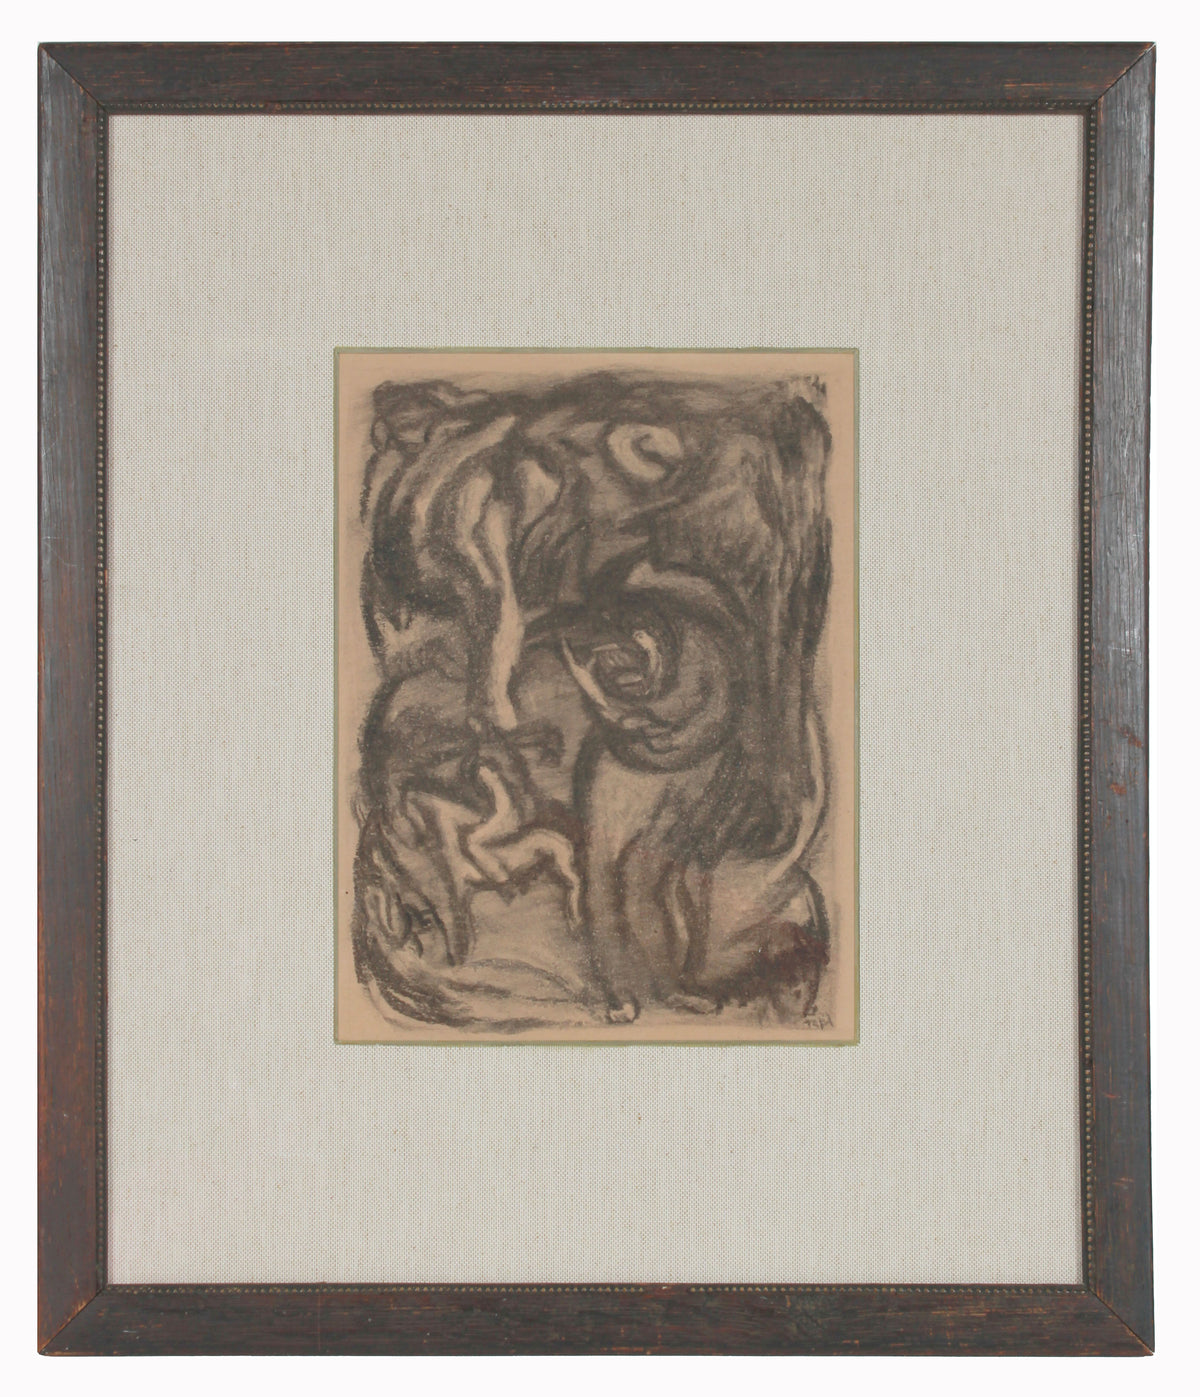 Expressionist Celestial Figurative Scene &lt;br&gt;Early 20th Century Charcoal &lt;br&gt;&lt;br&gt;#11932